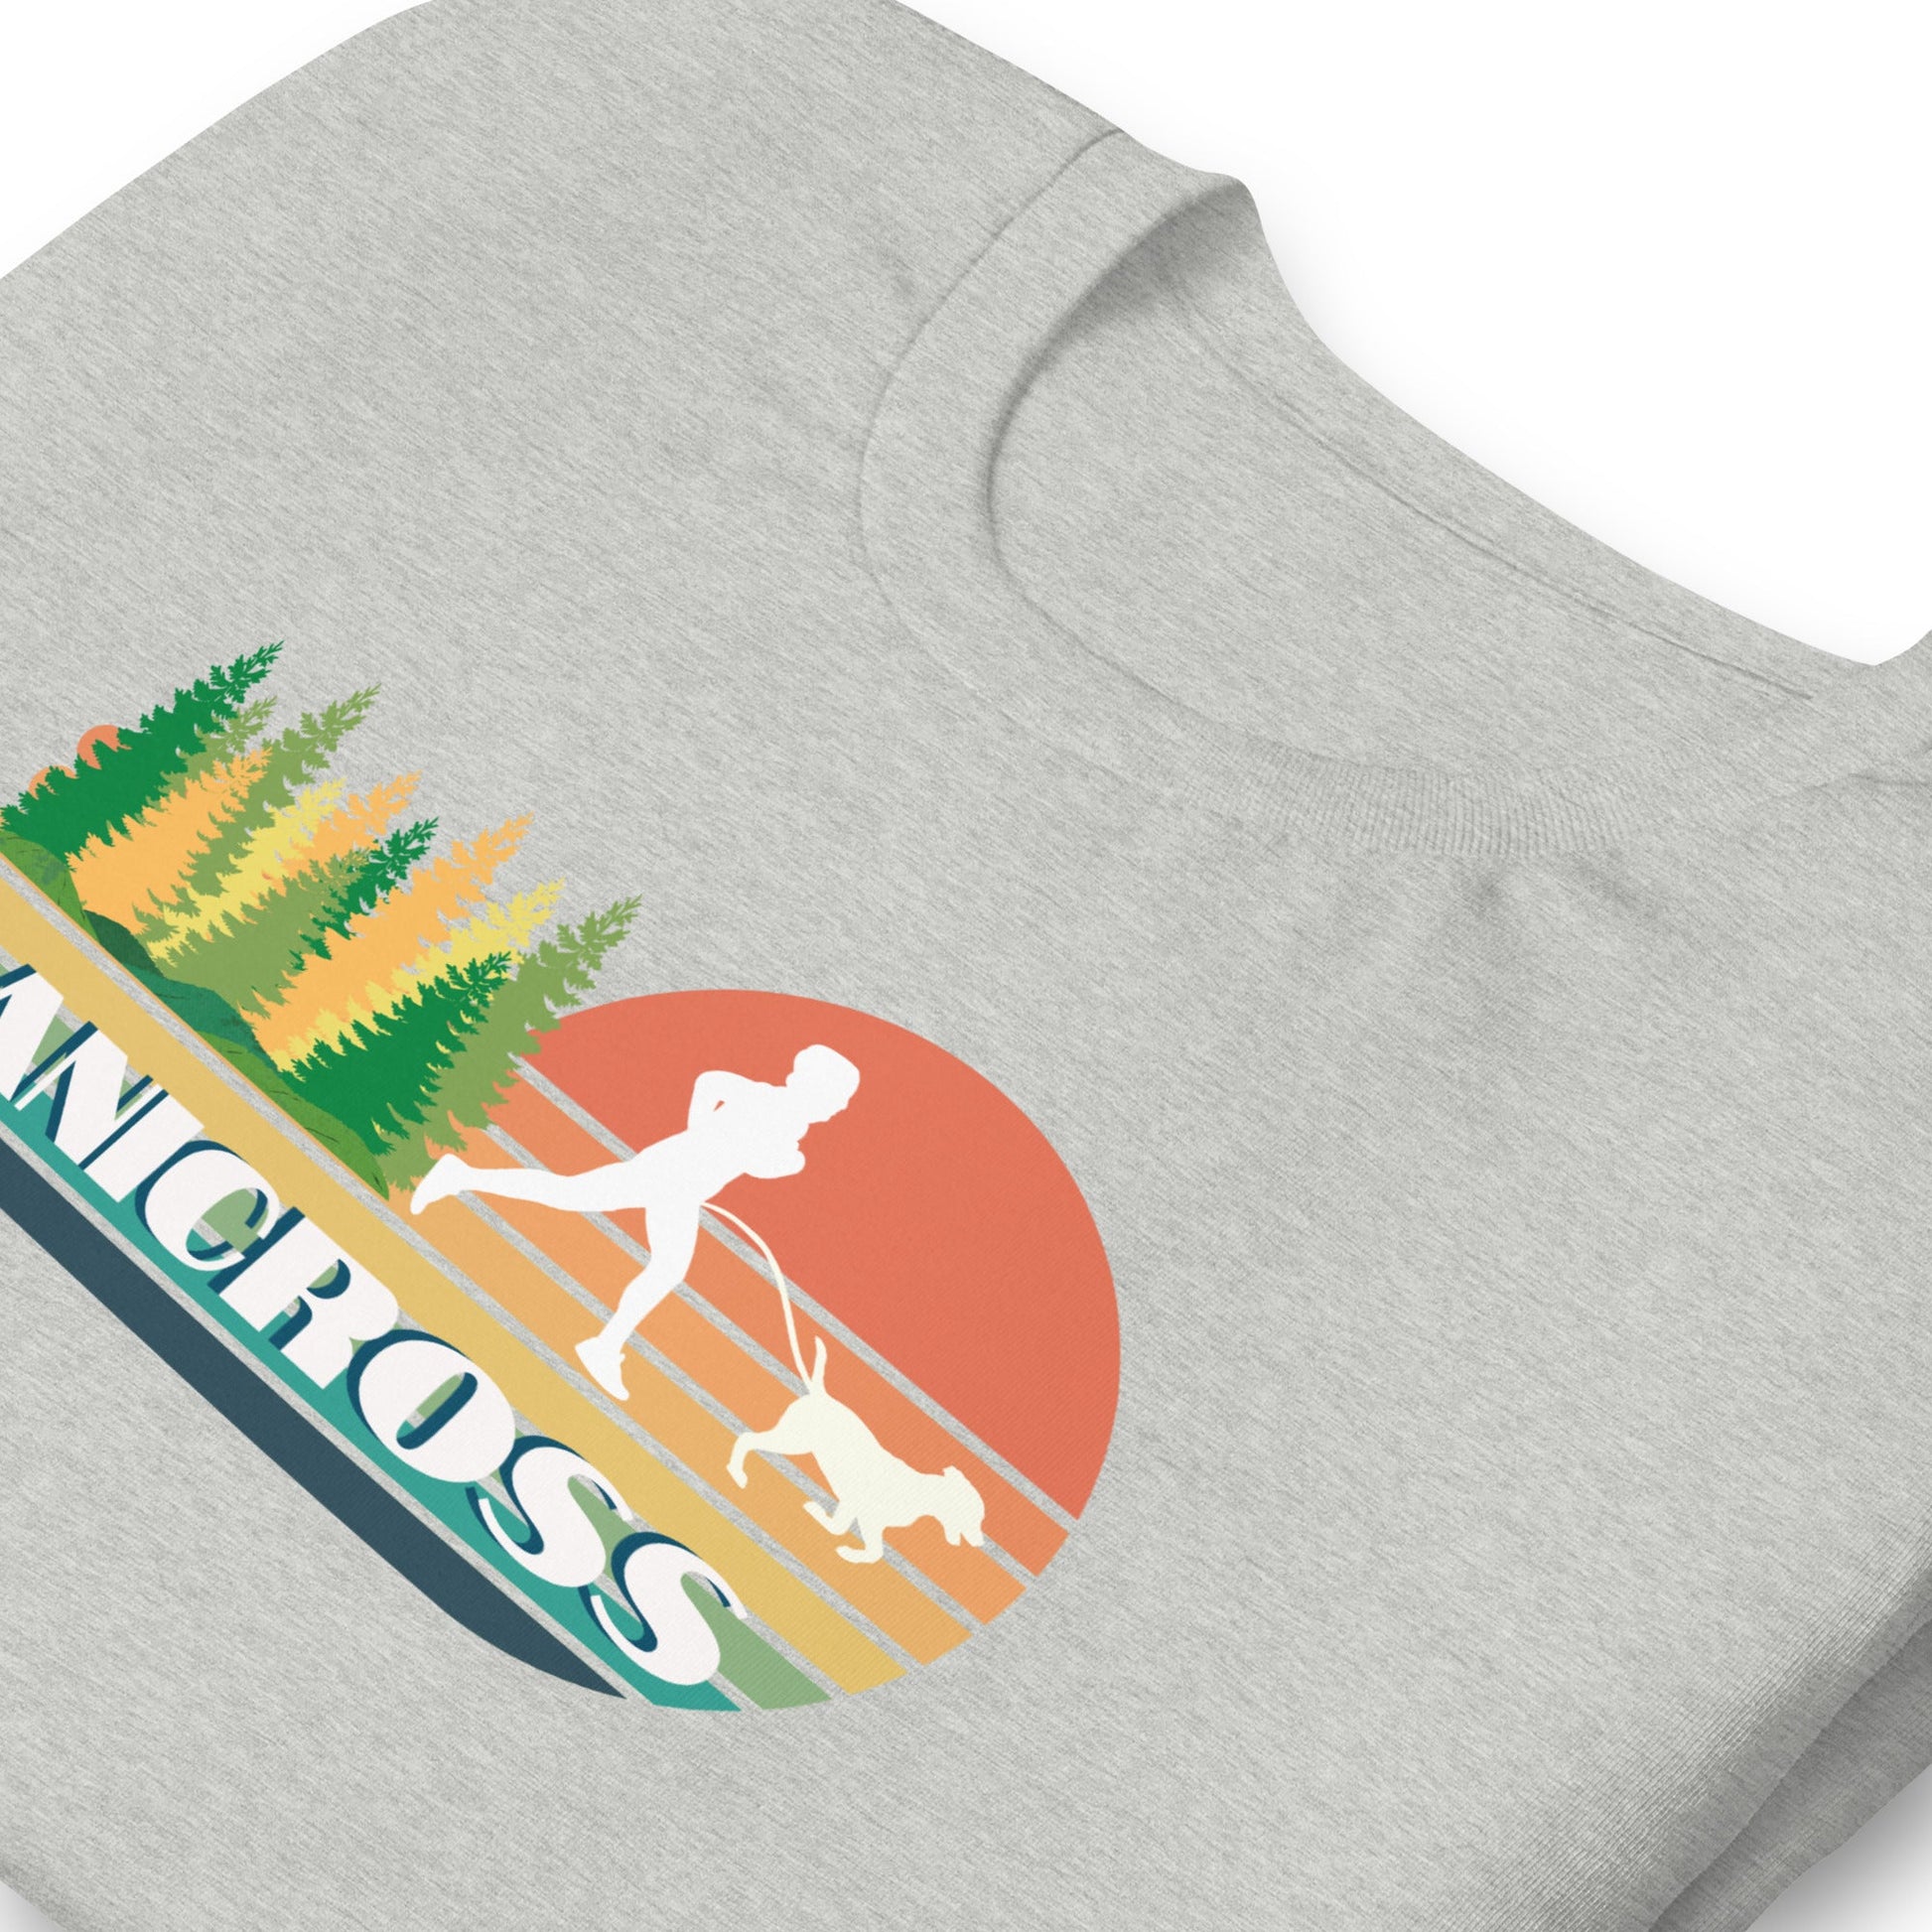 Canicross Graphic T-Shirt - DoggyLoveandMore